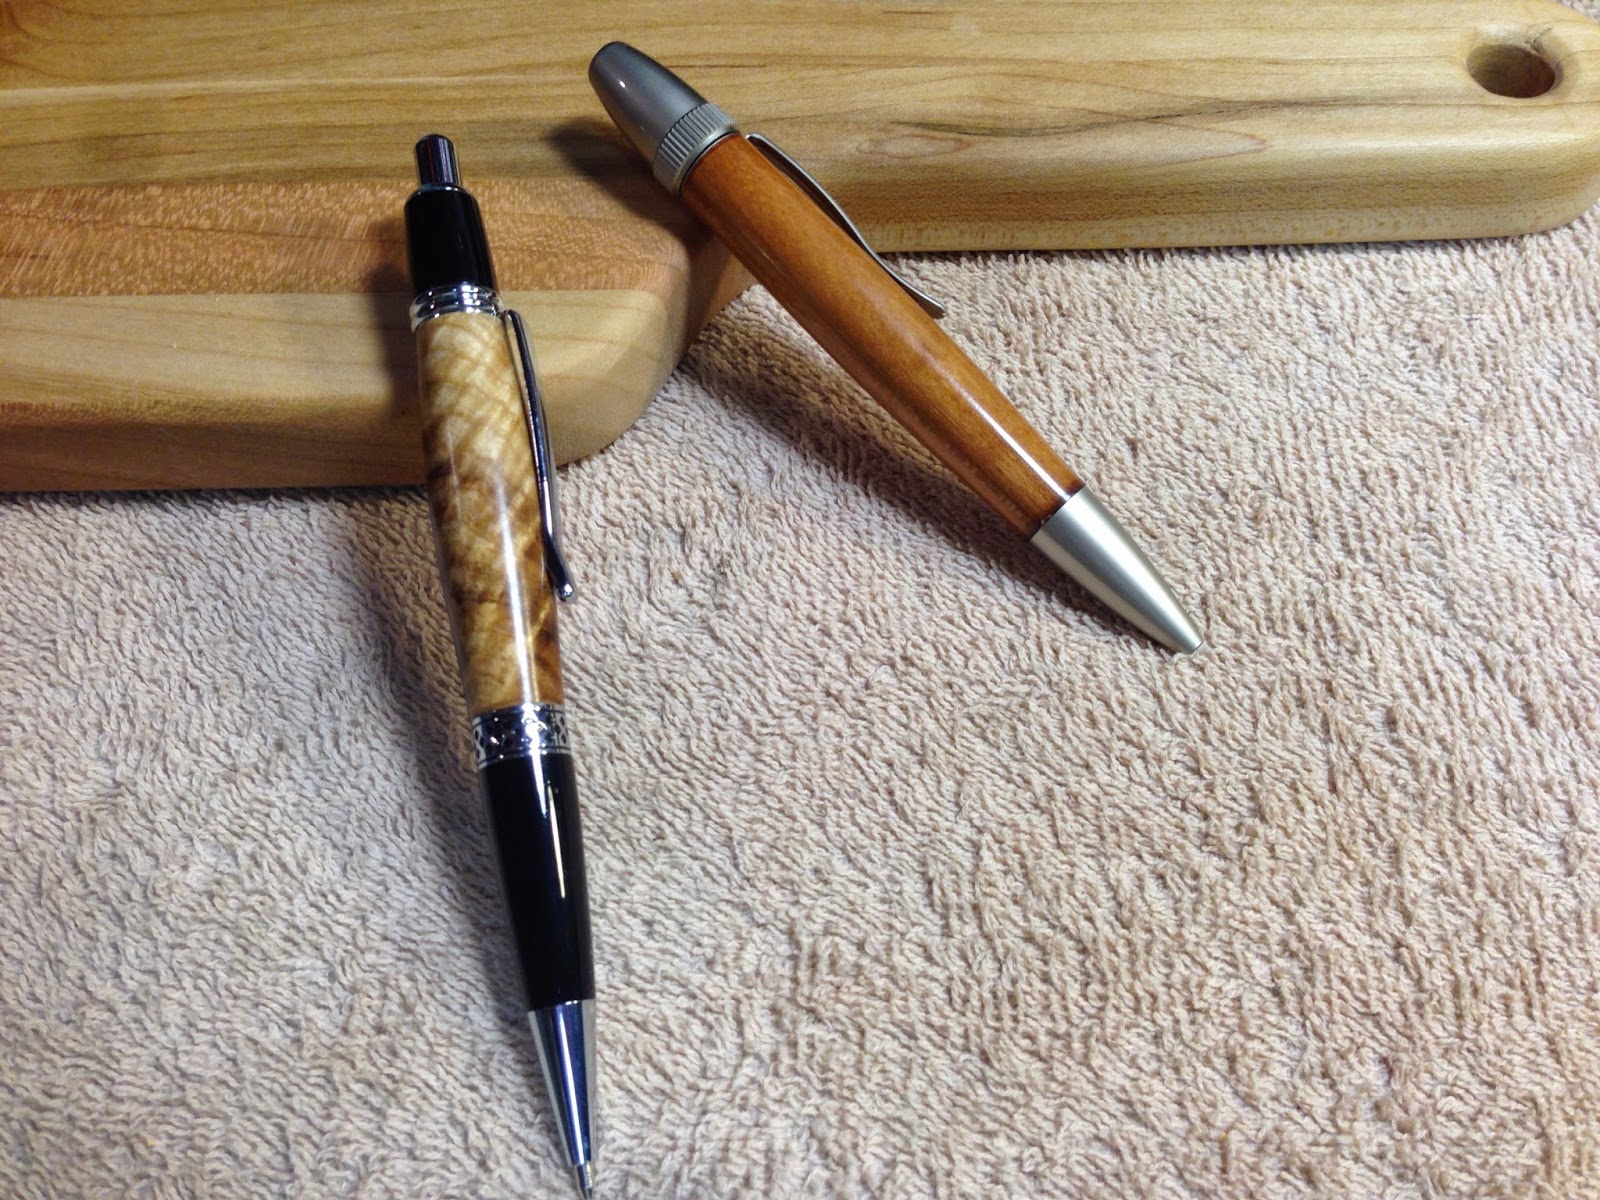 The Chris Pine Workshop: The Tale of Two Pens.